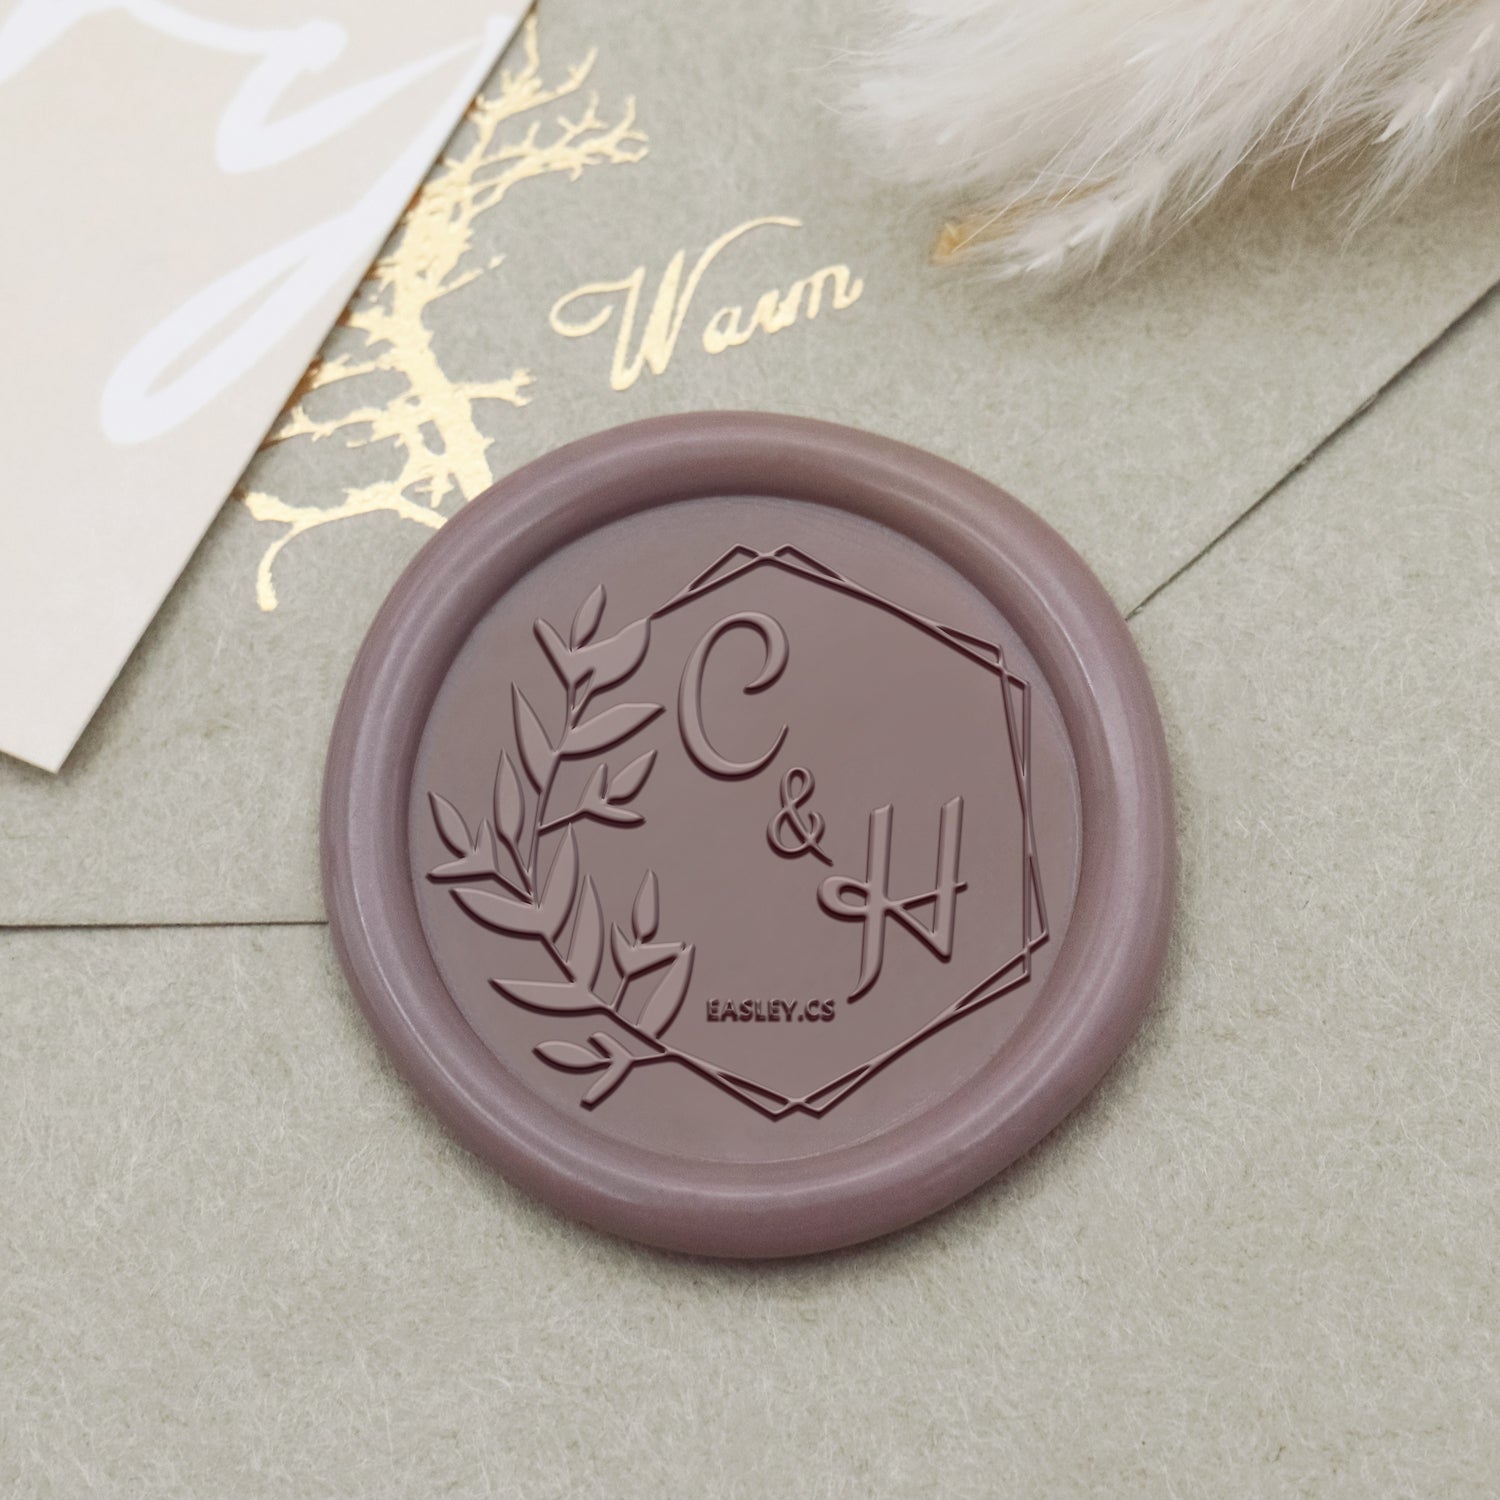 Wedding Initials Wax Seal / Monogram Wax Seal with self-adhesive back —  PAIGE BY DESIGN